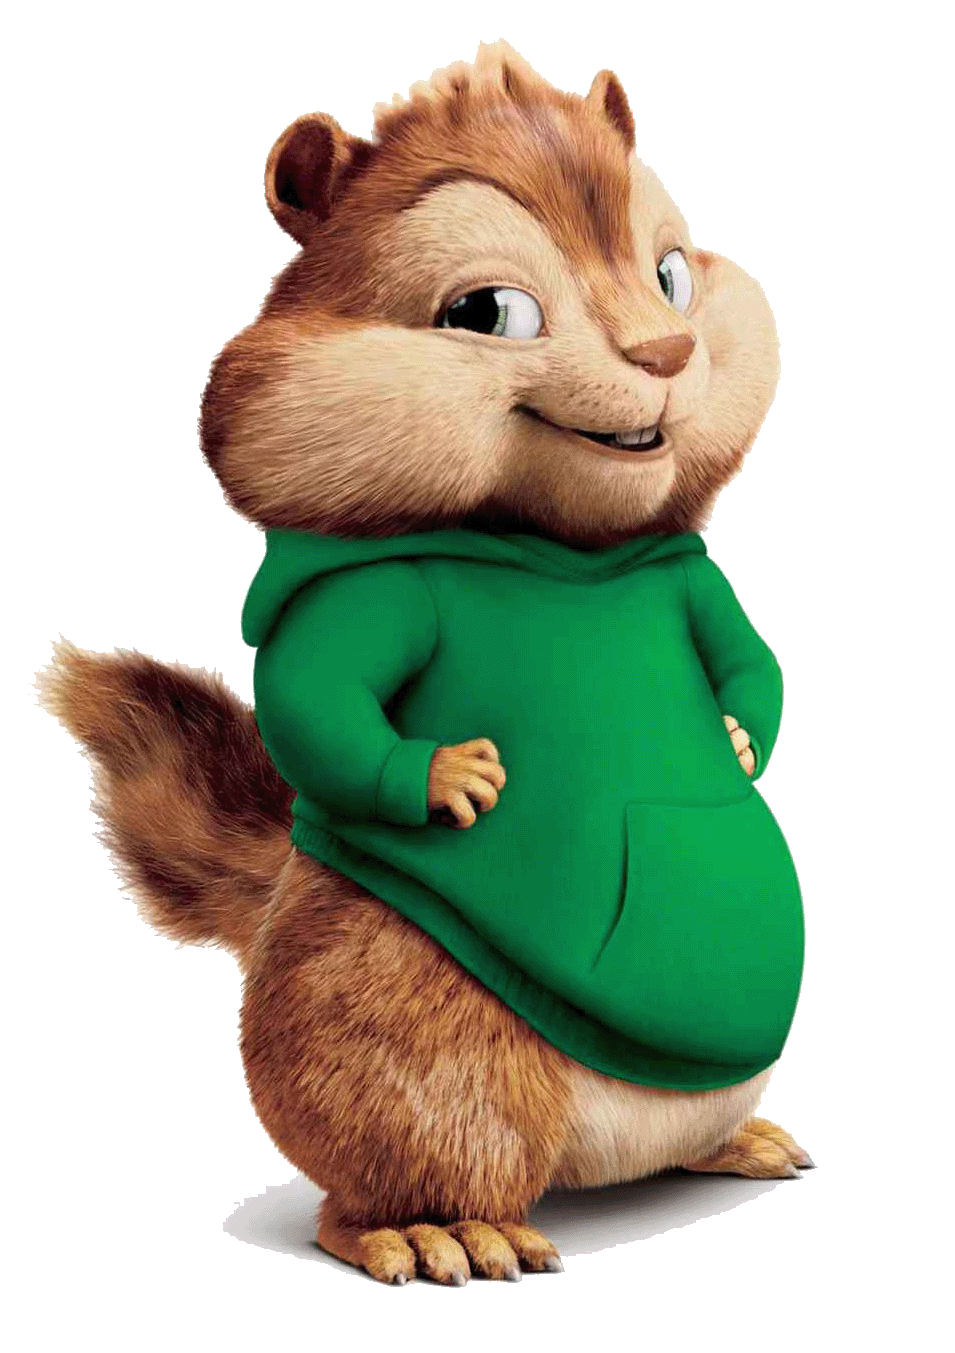 Alvin And The Chipmunks Backgrounds, Compatible - PC, Mobile, Gadgets| 955x1353 px